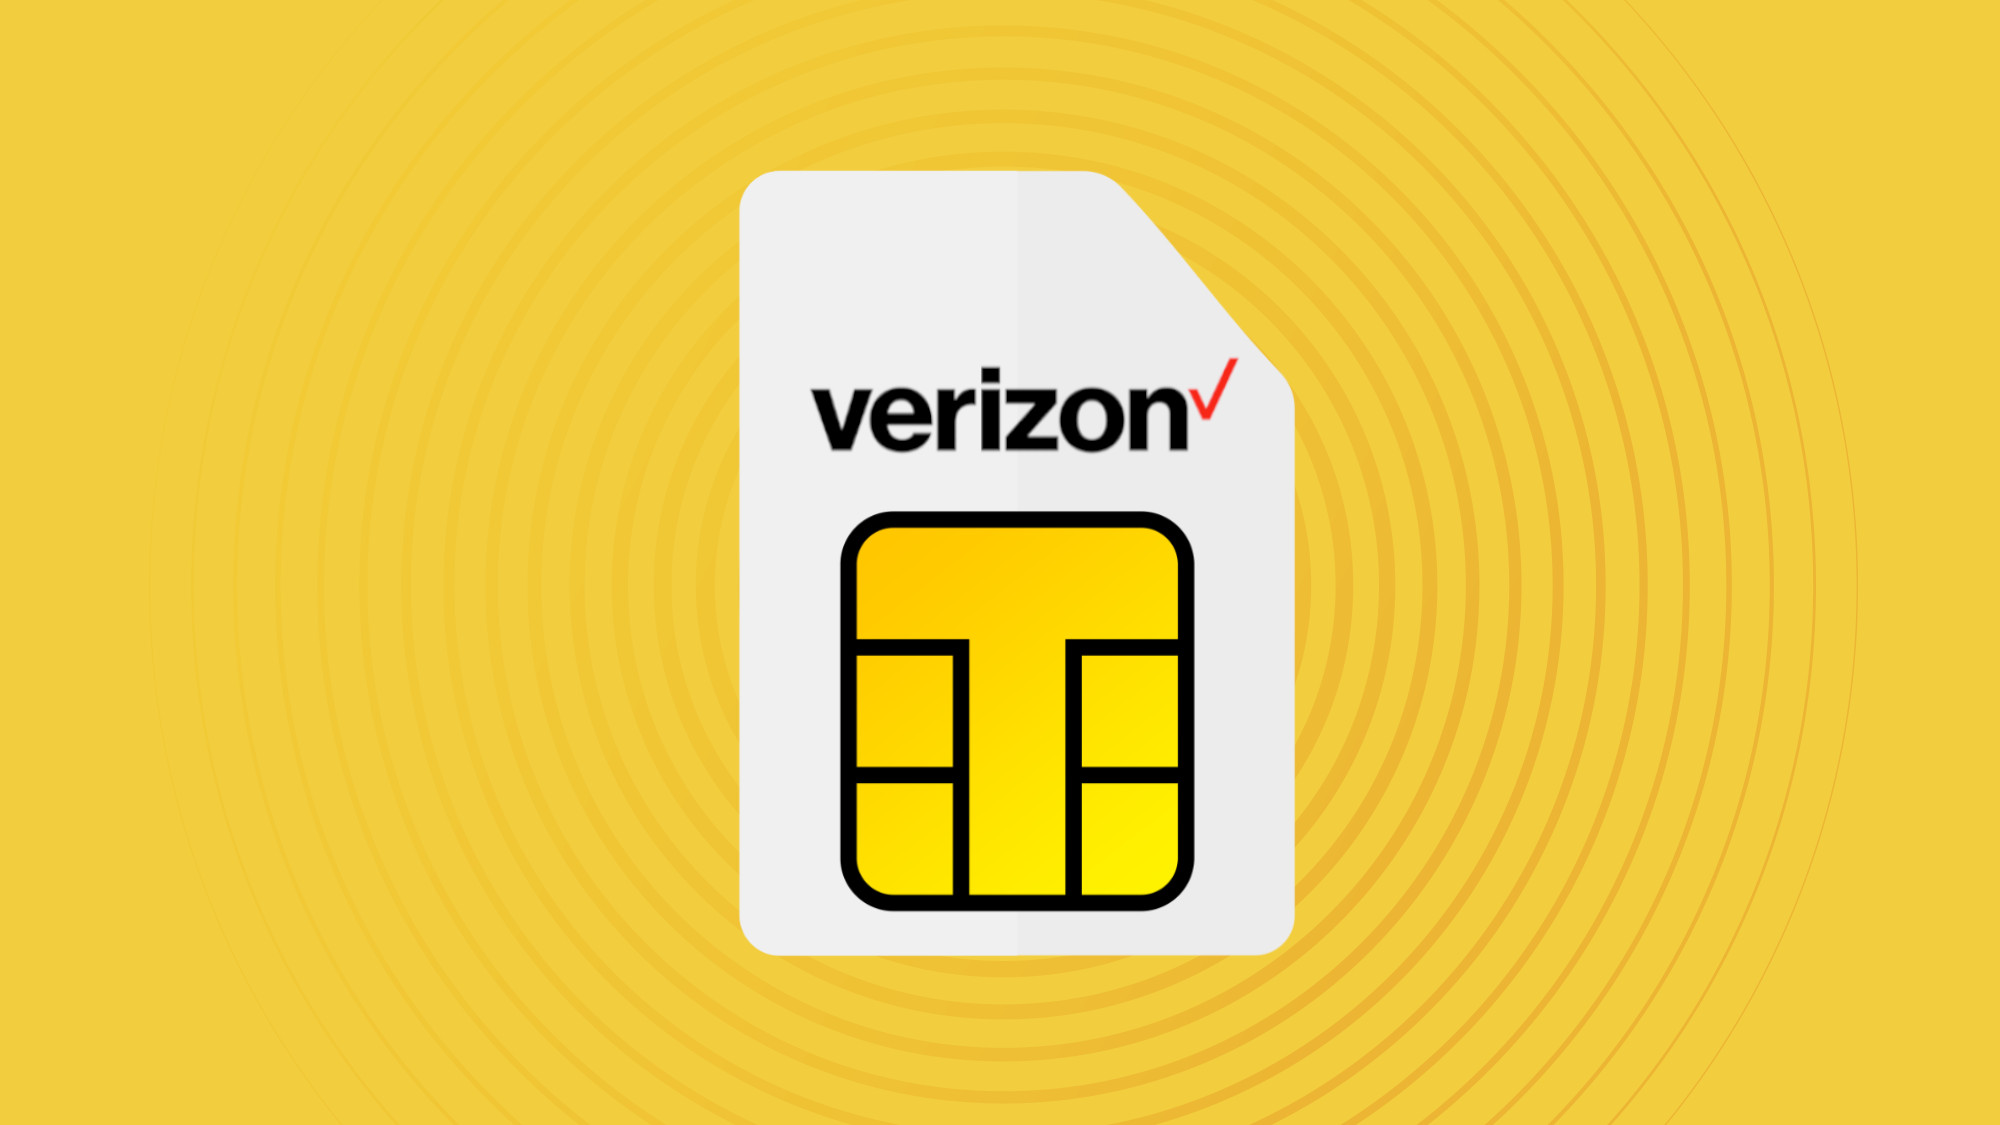 Is Verizon's Basic Plan Worth the Money? Find Out Here - Customer Reviews and Feedback on Verizon's Basic Plan